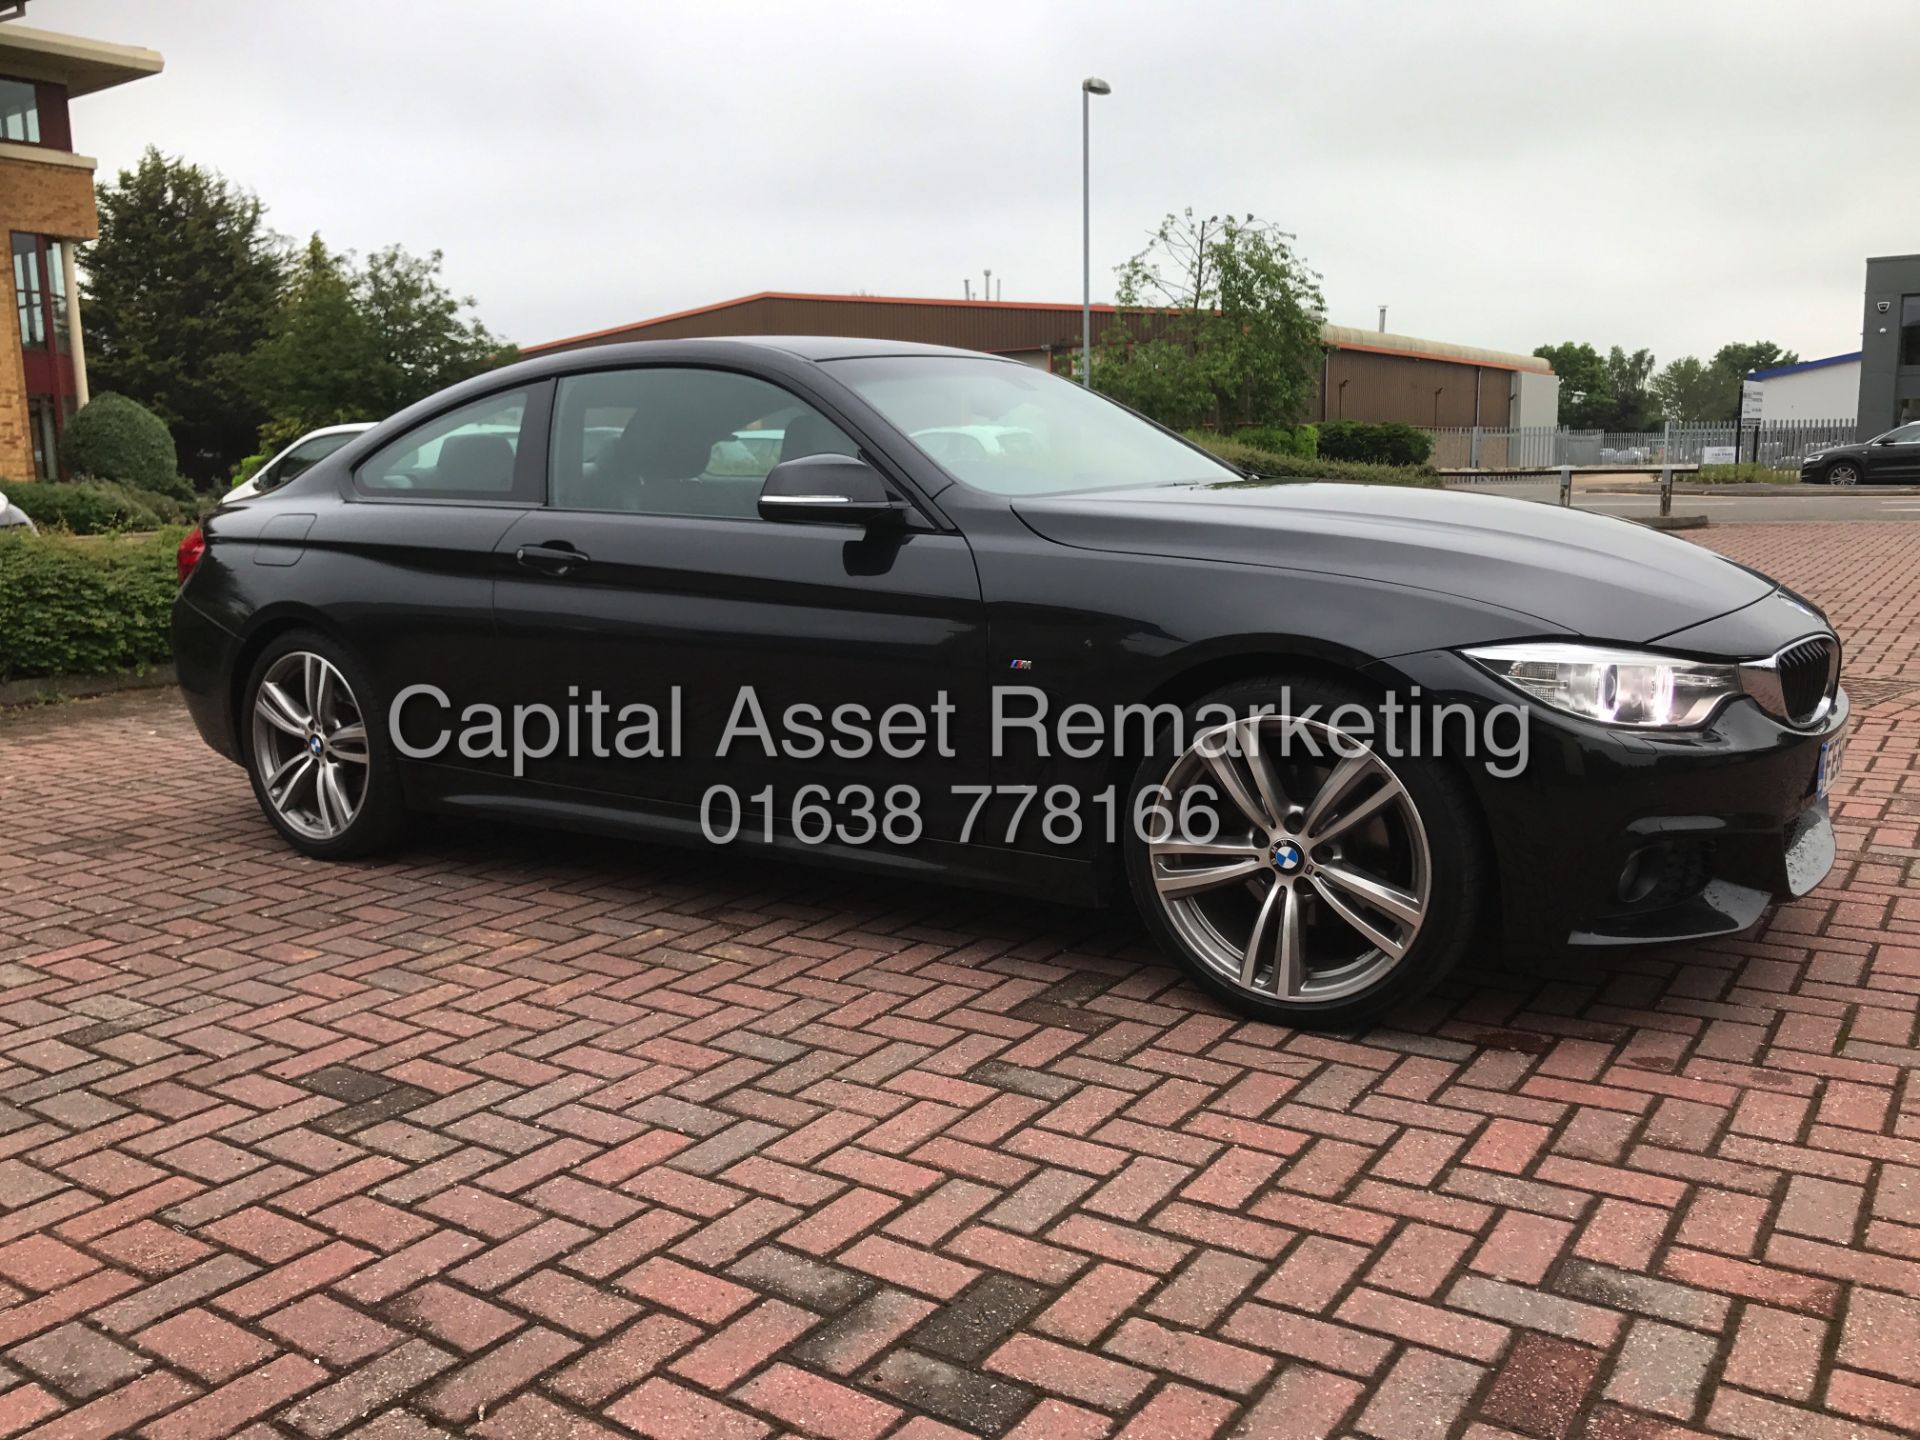 BMW 420D AUTO 8 SPEED "M-SPORT" COUPE (2017 MODEL) 1 OWNER WITH BMW HISTORY - SAT NAV - I DRIVE